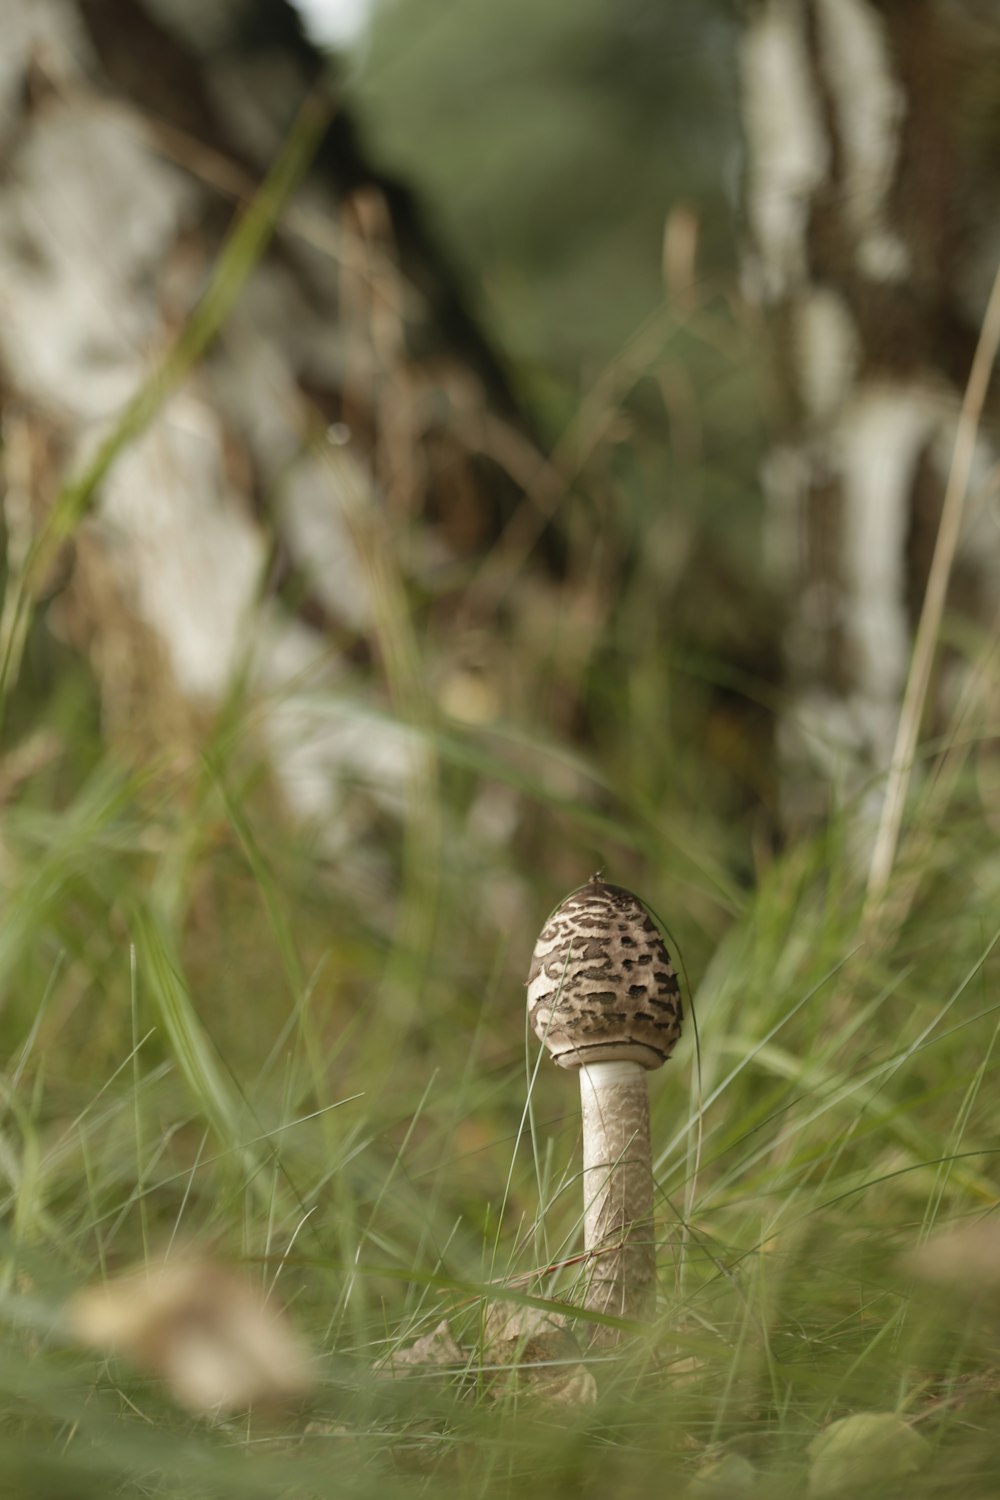 a mushroom growing in the grass